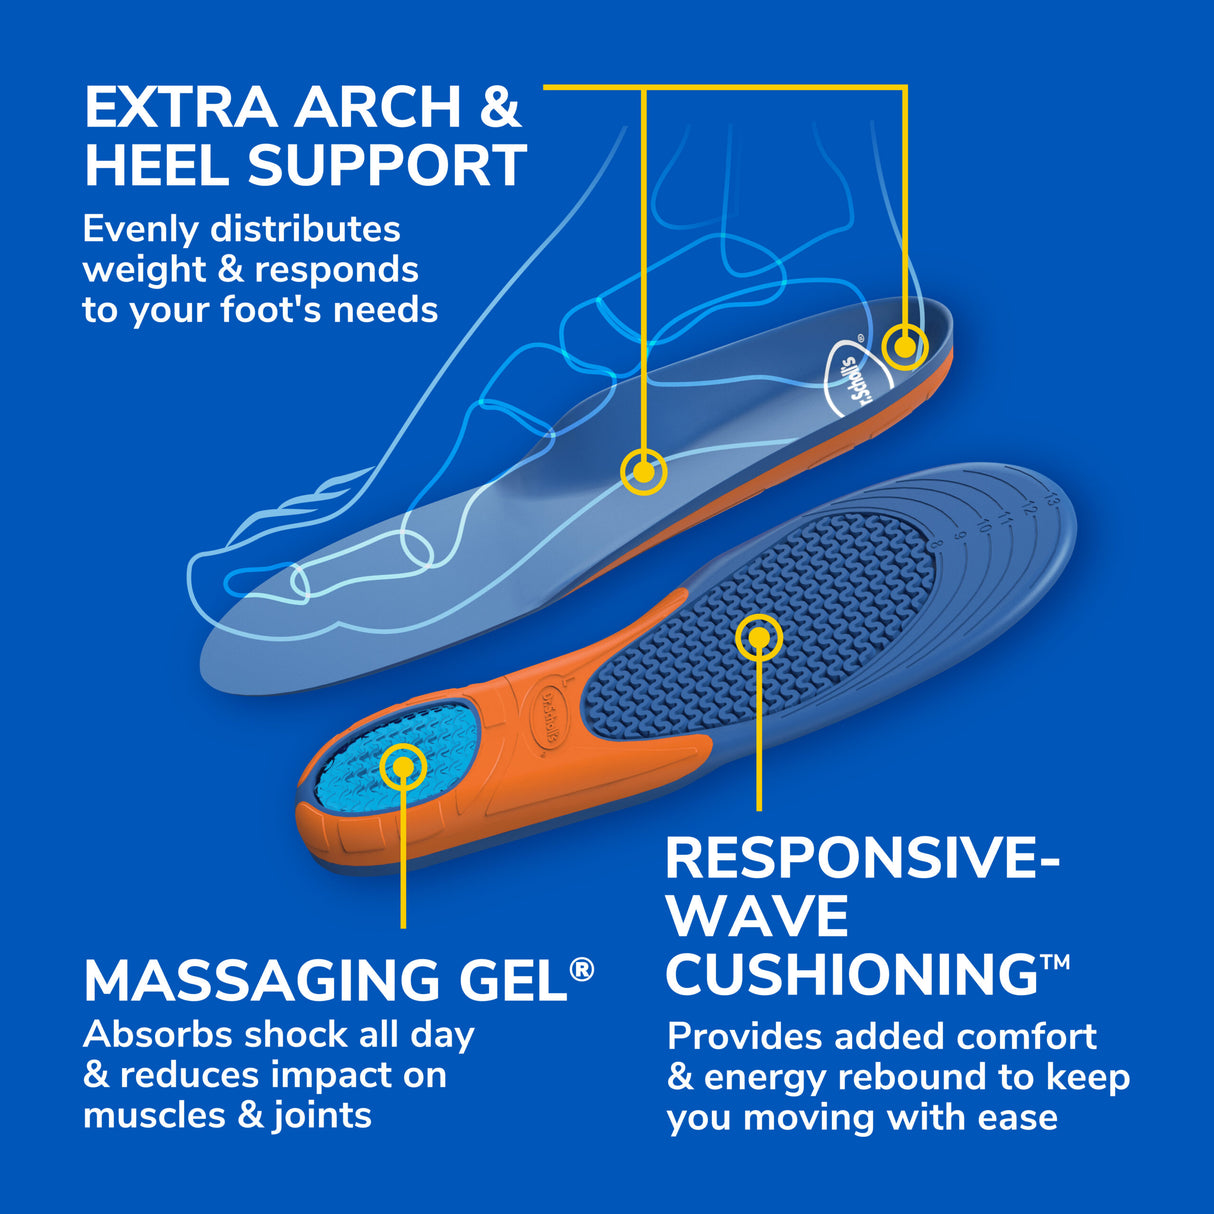 image of extra arch and heel support, massaging gel, responsive wave sushioning